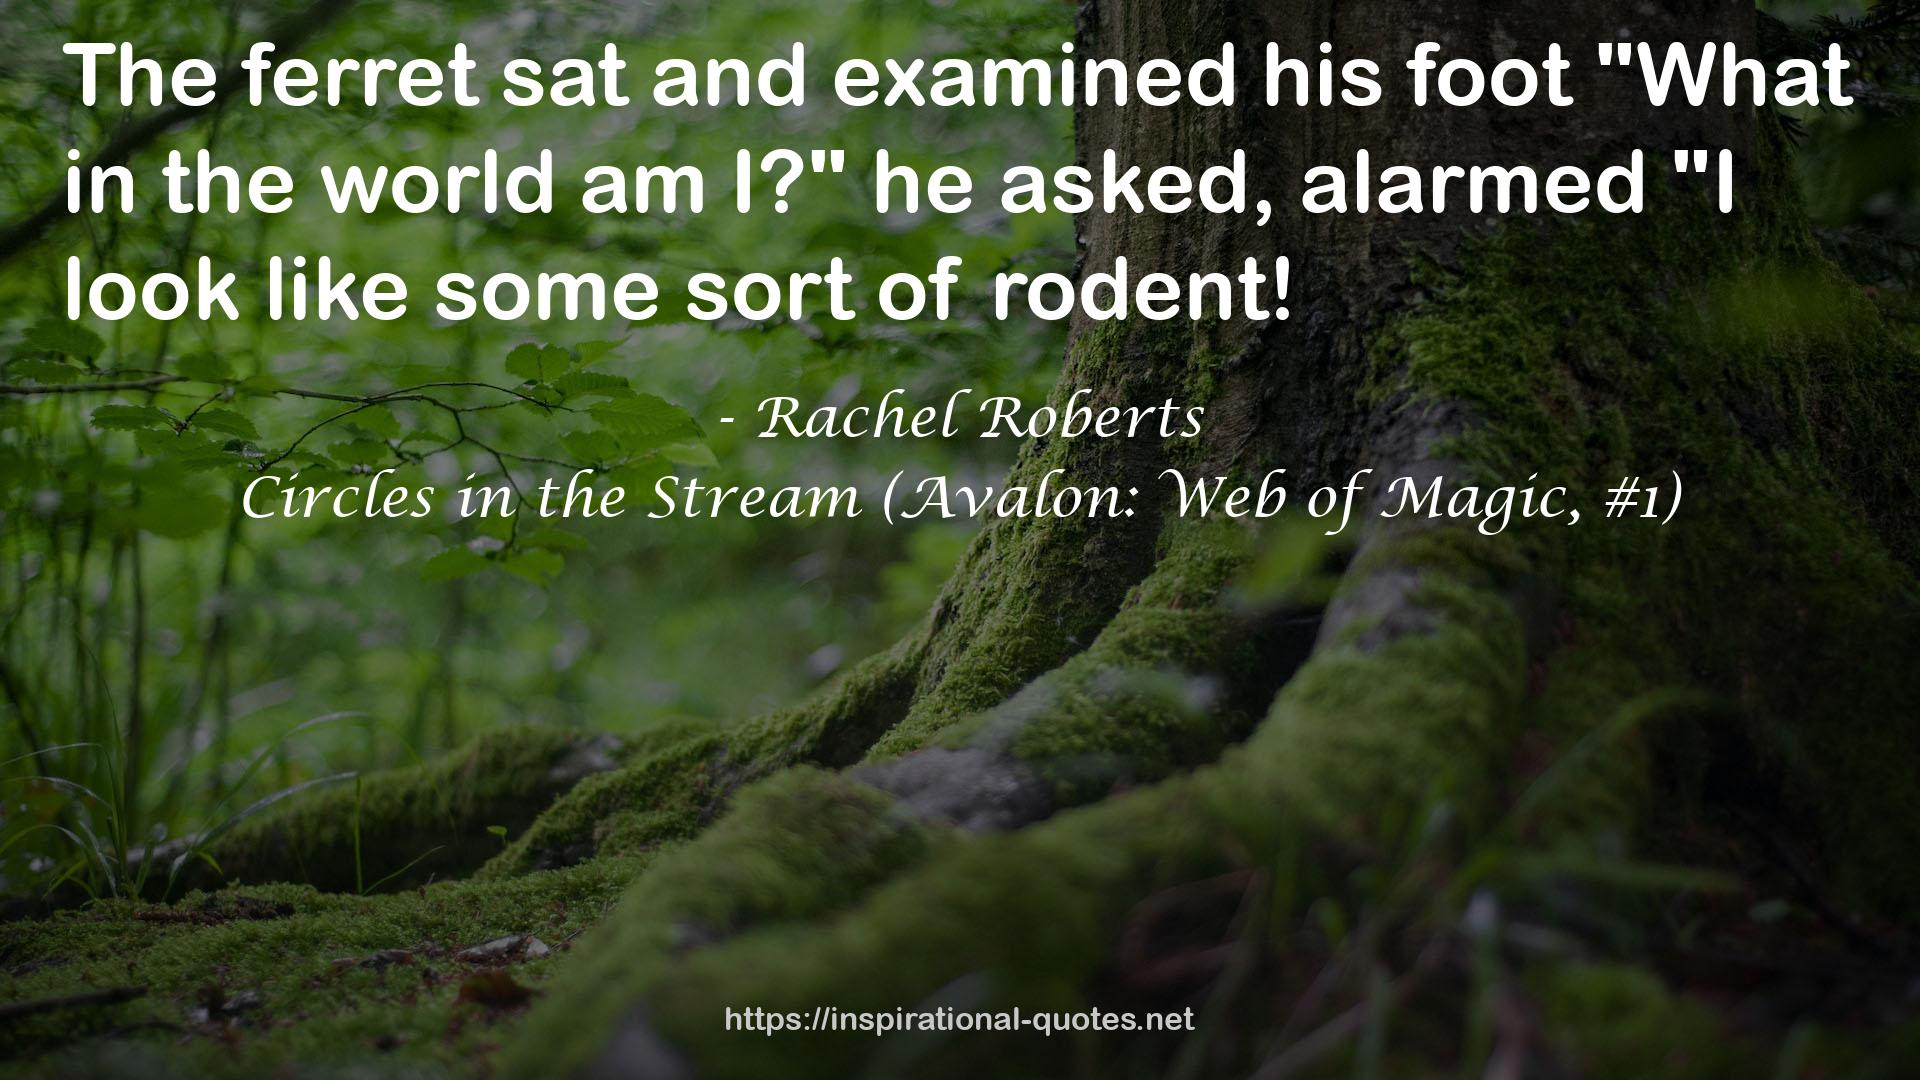 Circles in the Stream (Avalon: Web of Magic, #1) QUOTES